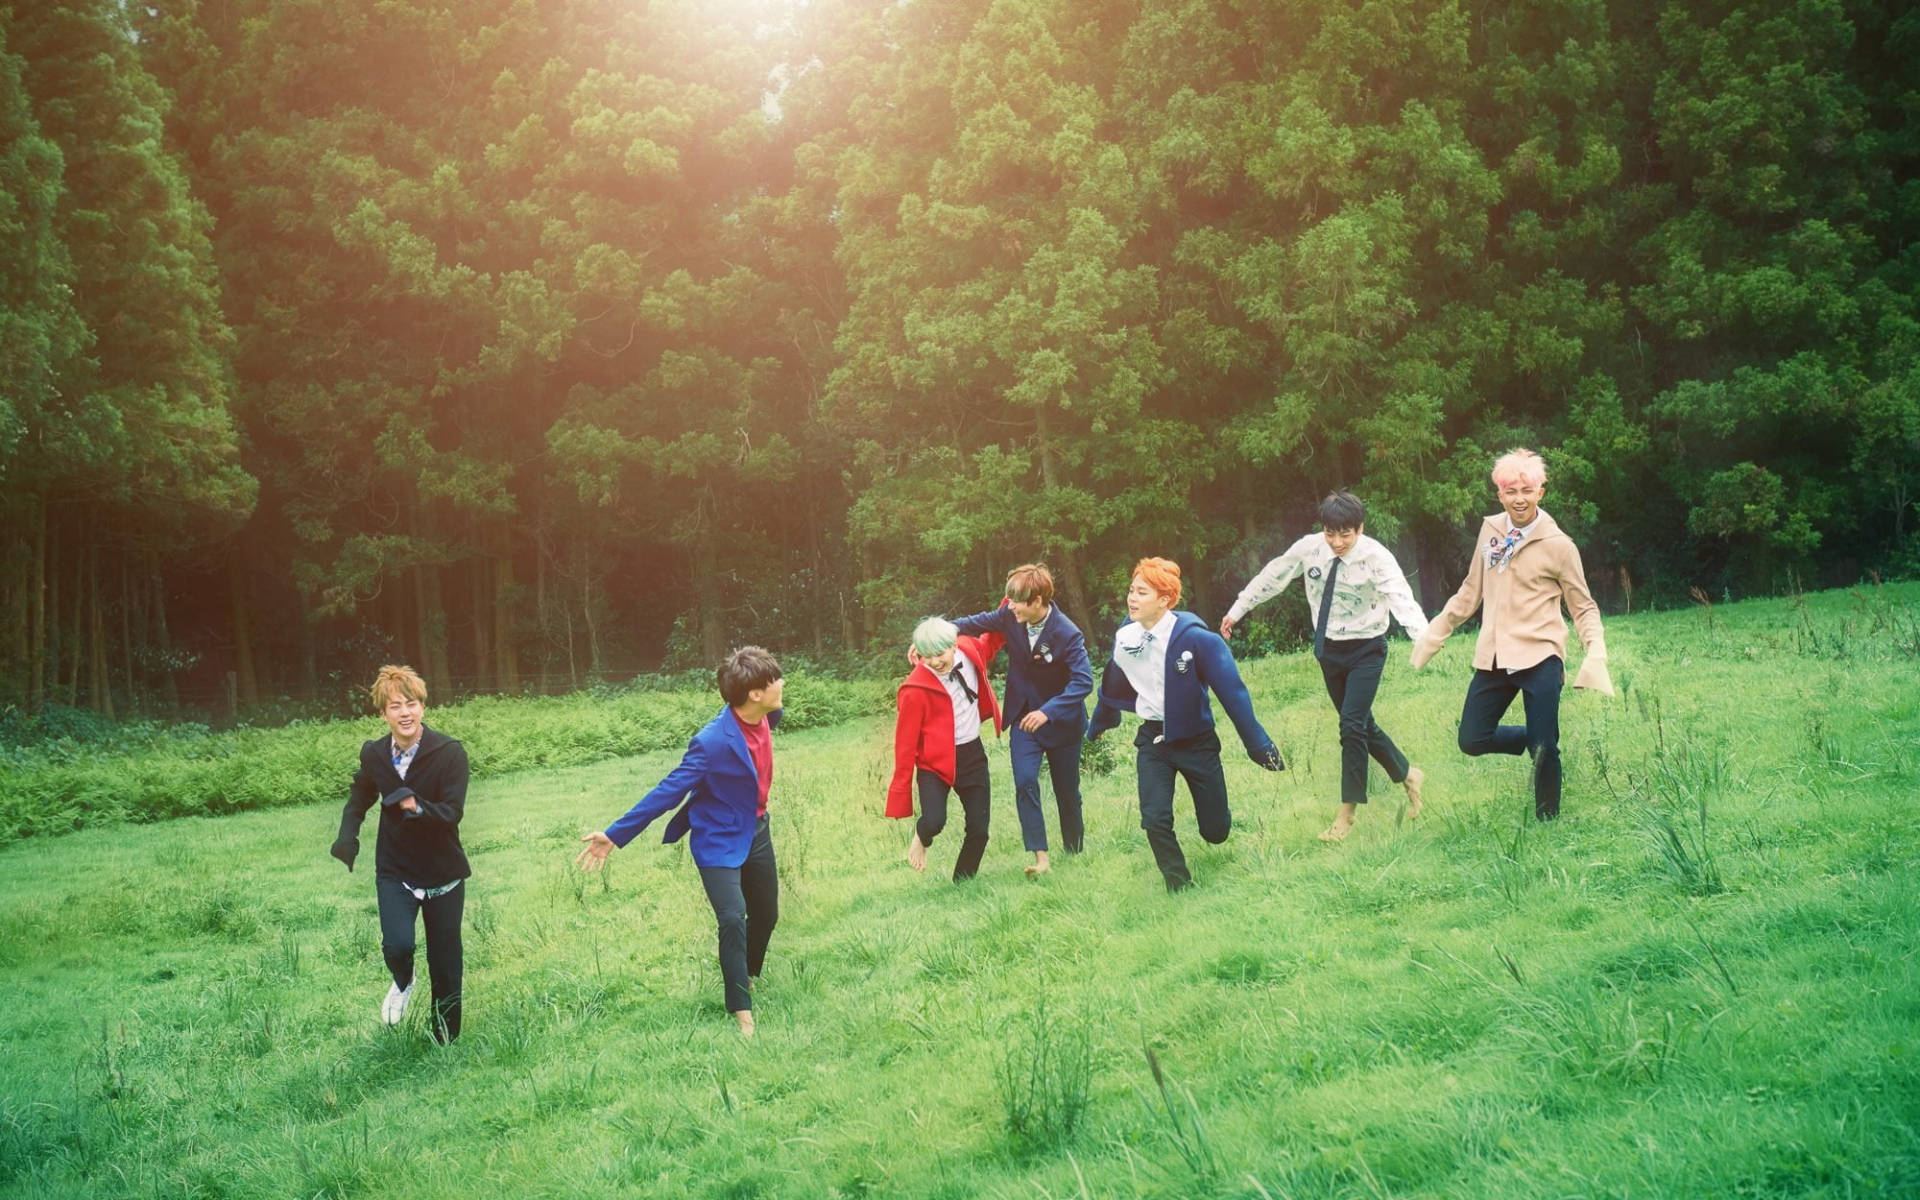 Bts Group Photo In Green Field Background